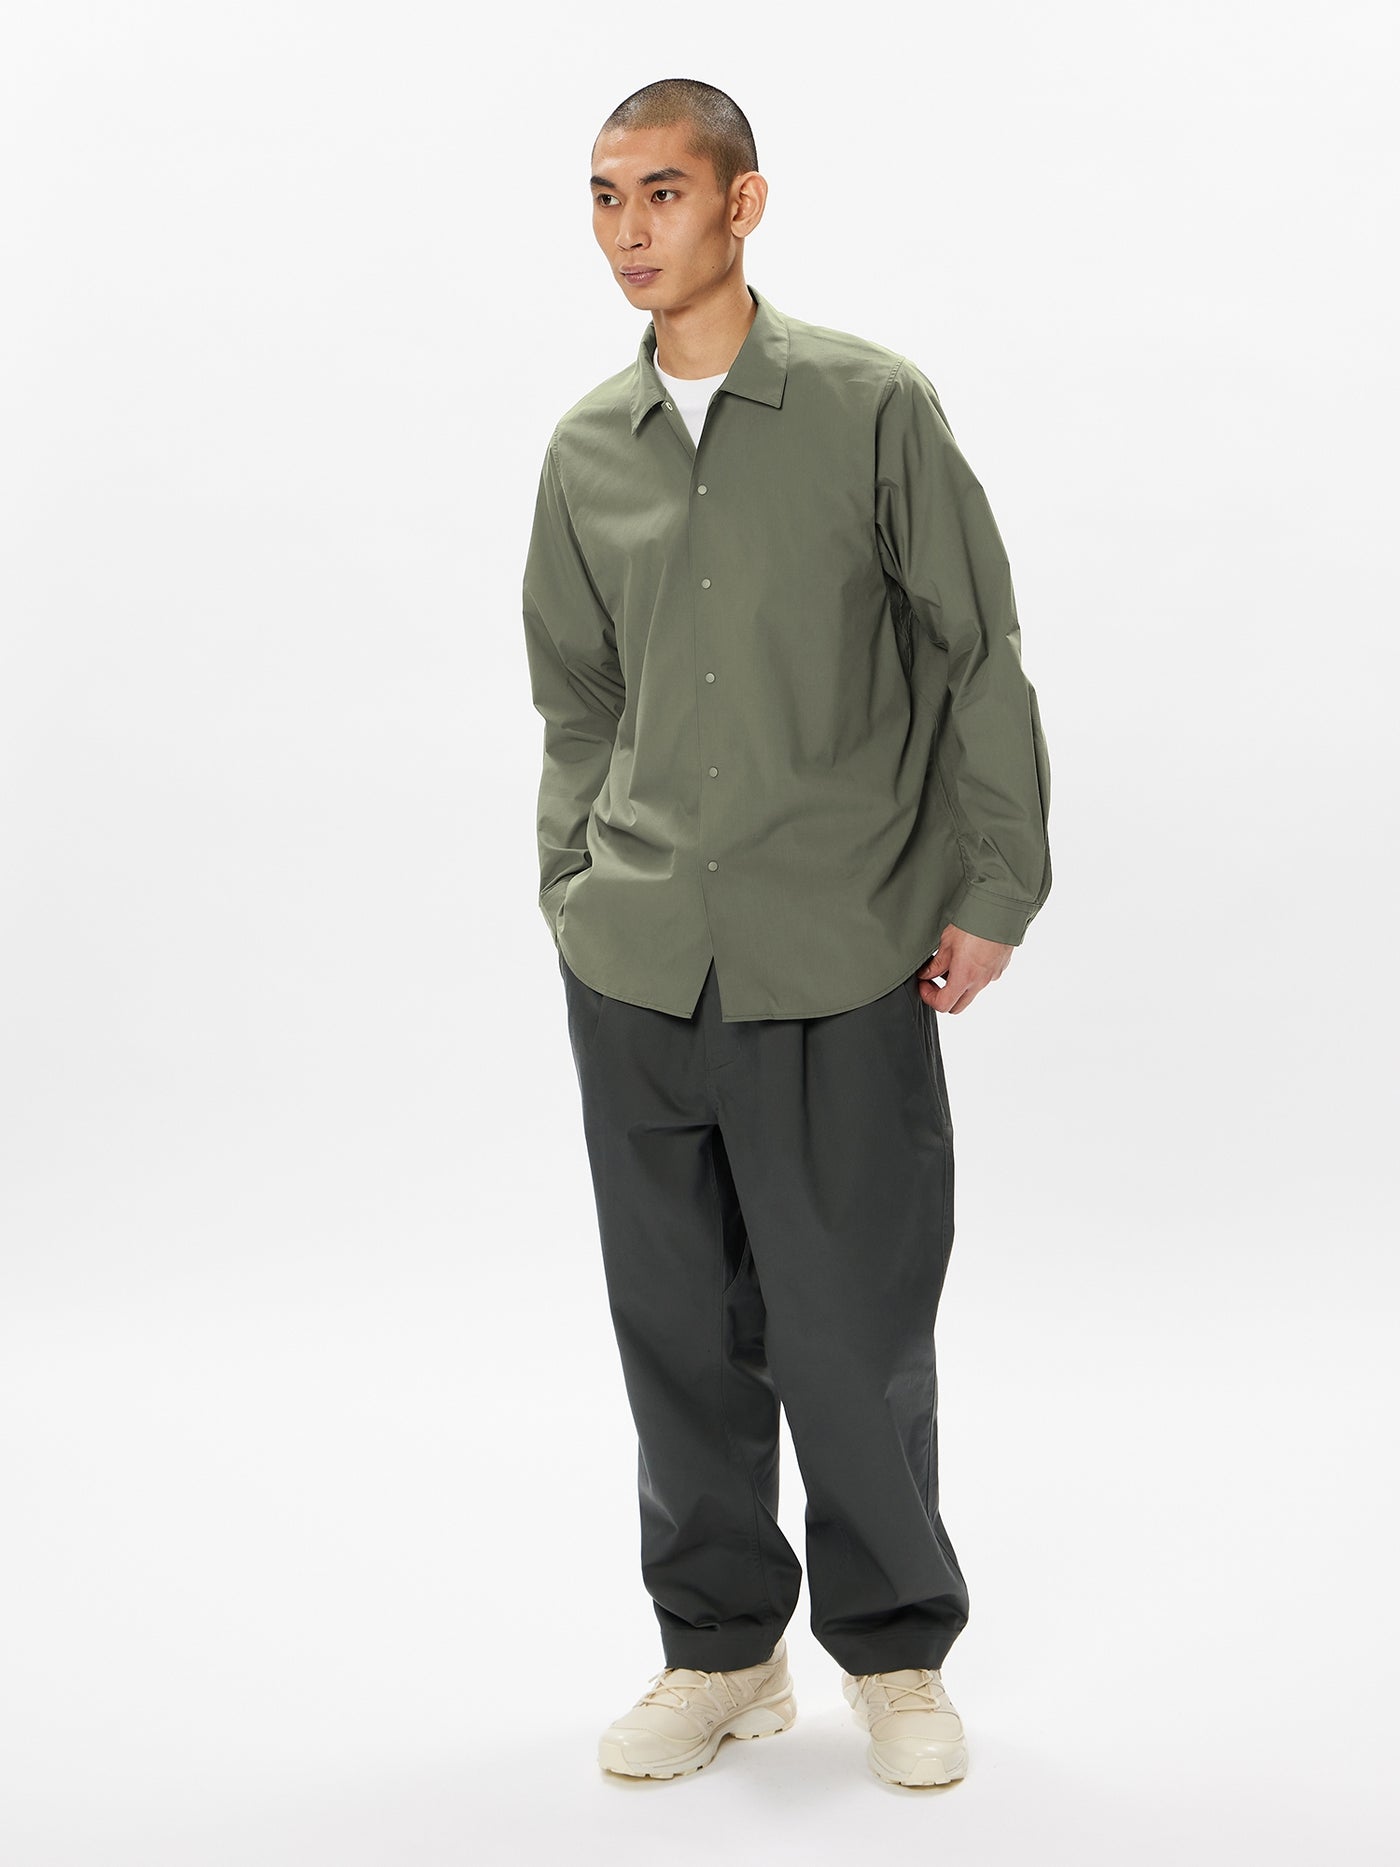 Model: Height 5'9" | Wearing: OLIVE DRAB / 3